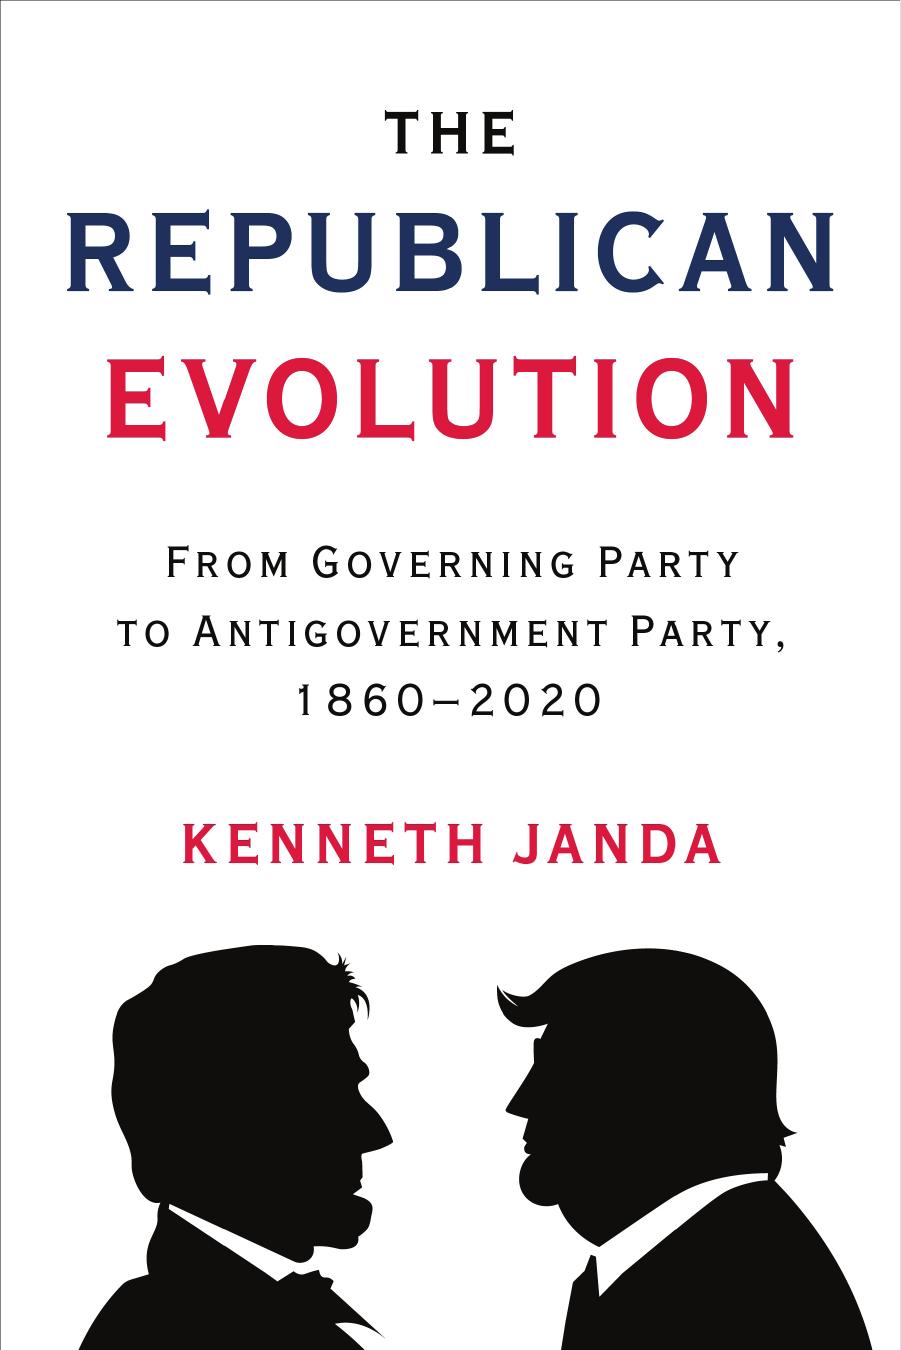 The Republican Evolution: From Governing Party to Antigovernment Party, 1860â2020 by Janda Kenneth